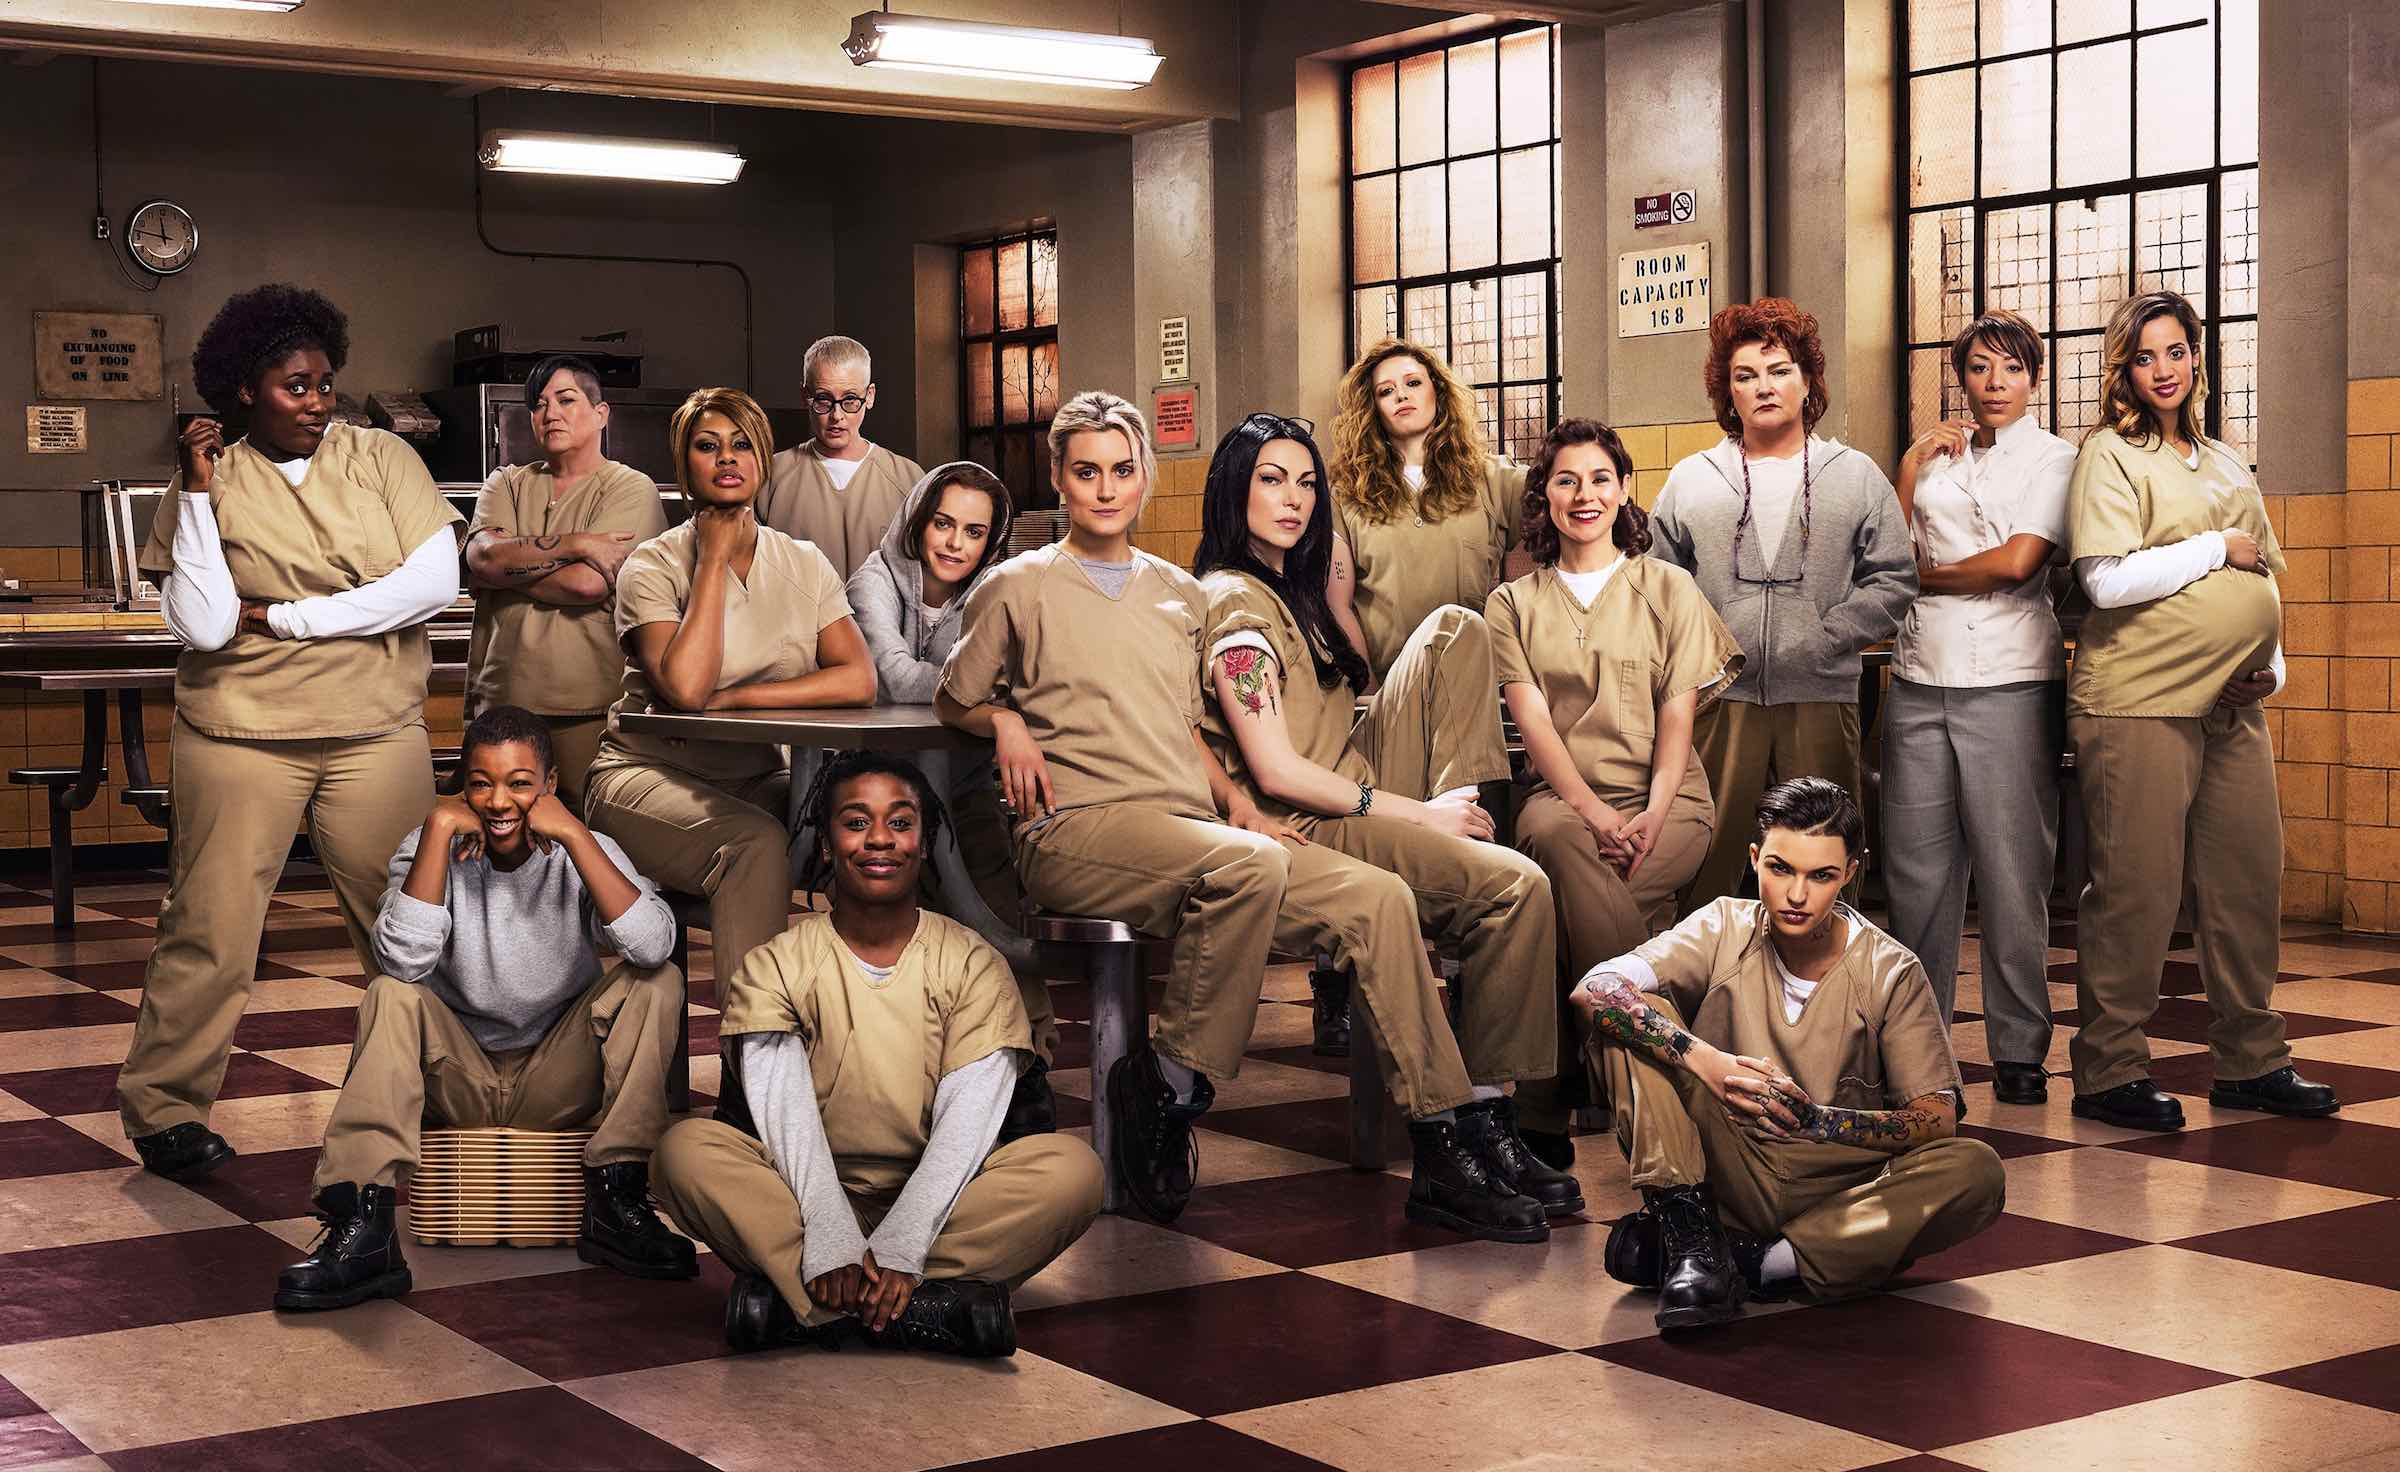 What is it about Netflix's 'Orange is the New Black' that keeps you coming back? And why should you cast your vote for it in the Bingewatch Awards?